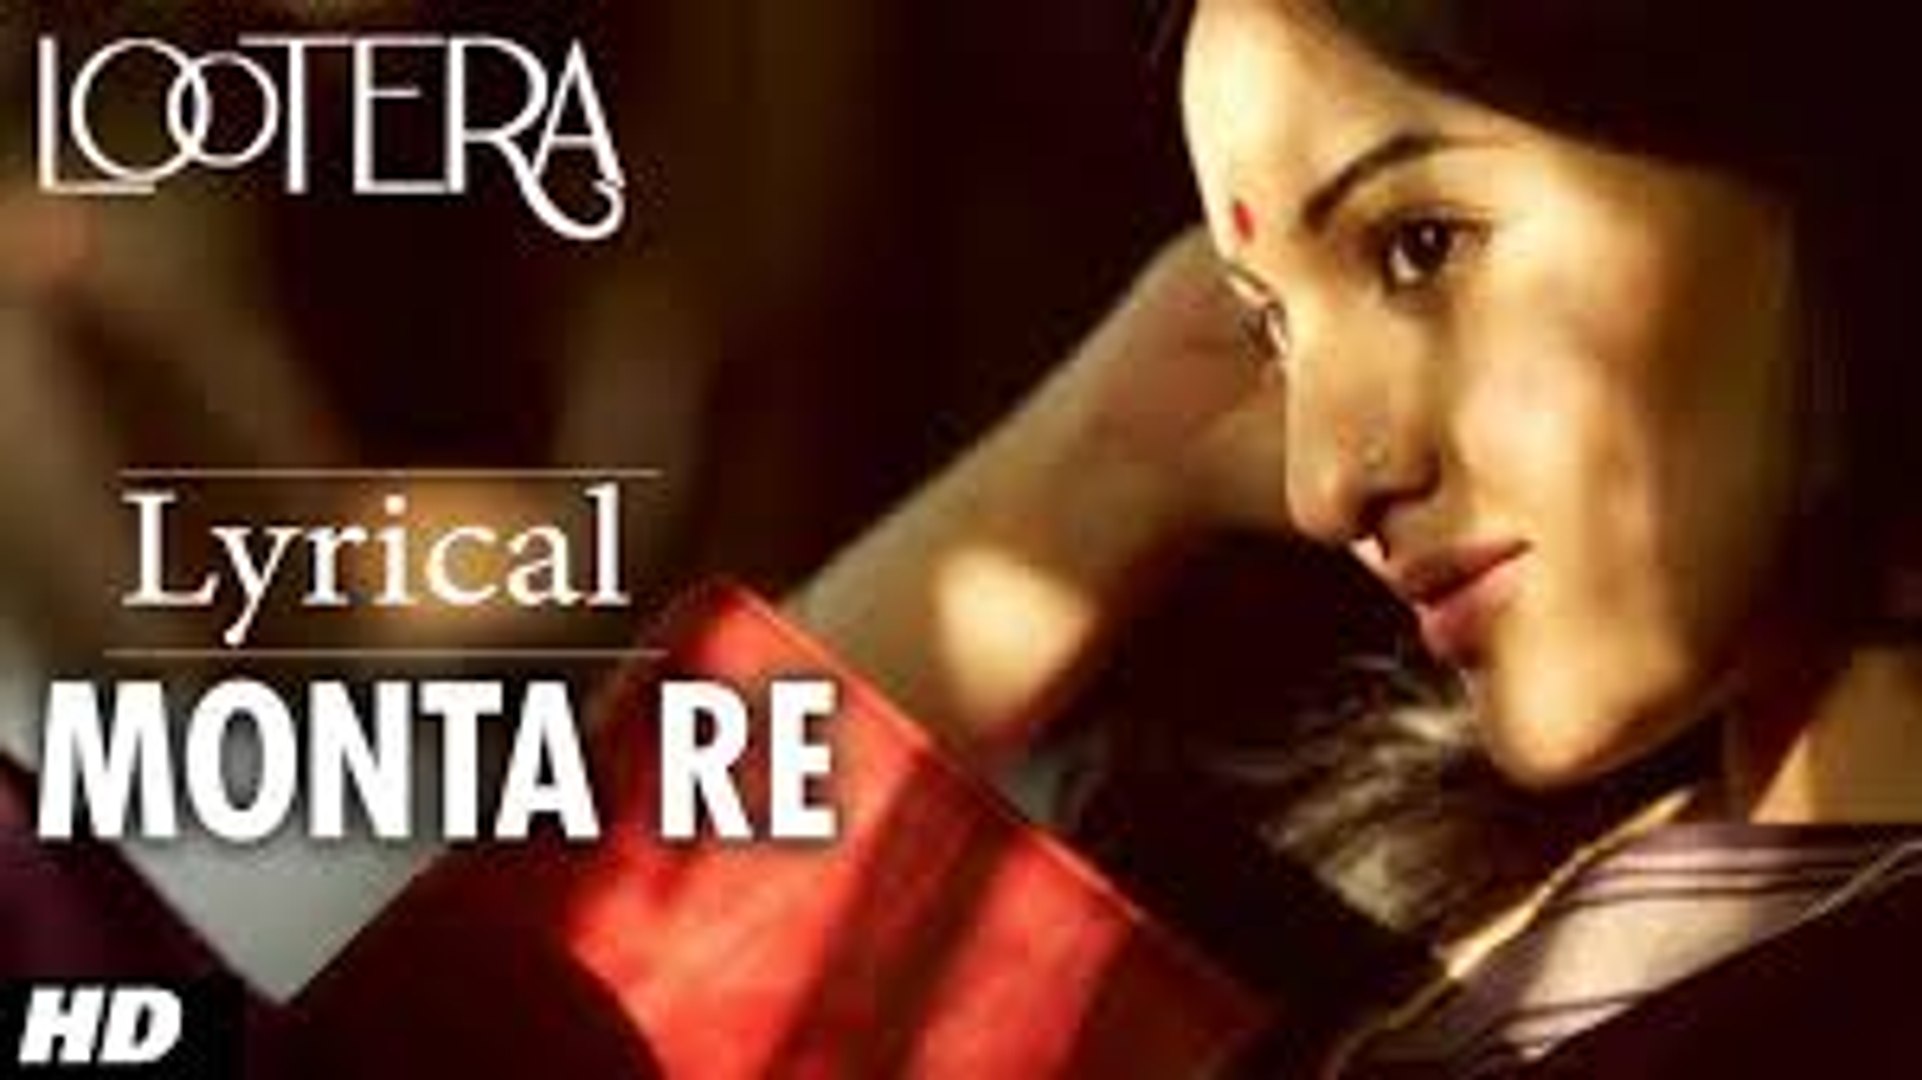 Monta Re Video Song (Lootera) Full HD - video Dailymotion